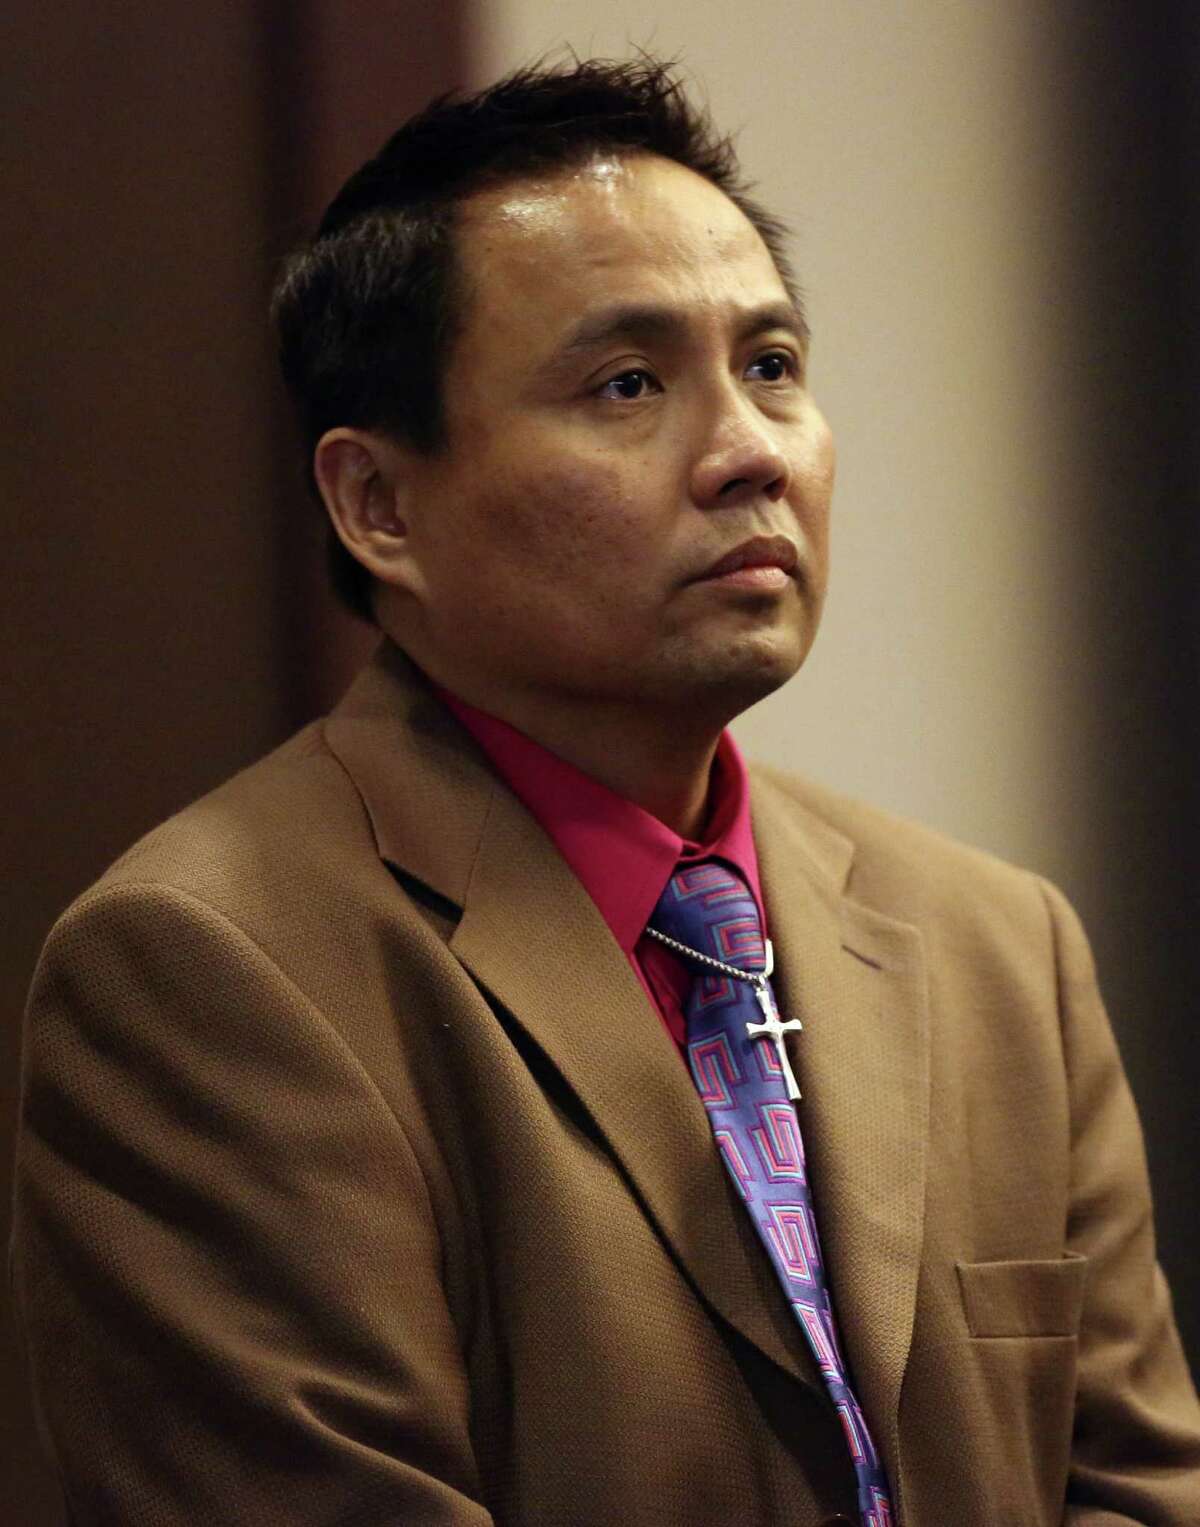 Norberto Velasquez, convicted of first-degree felony injury to a child, was given probation.